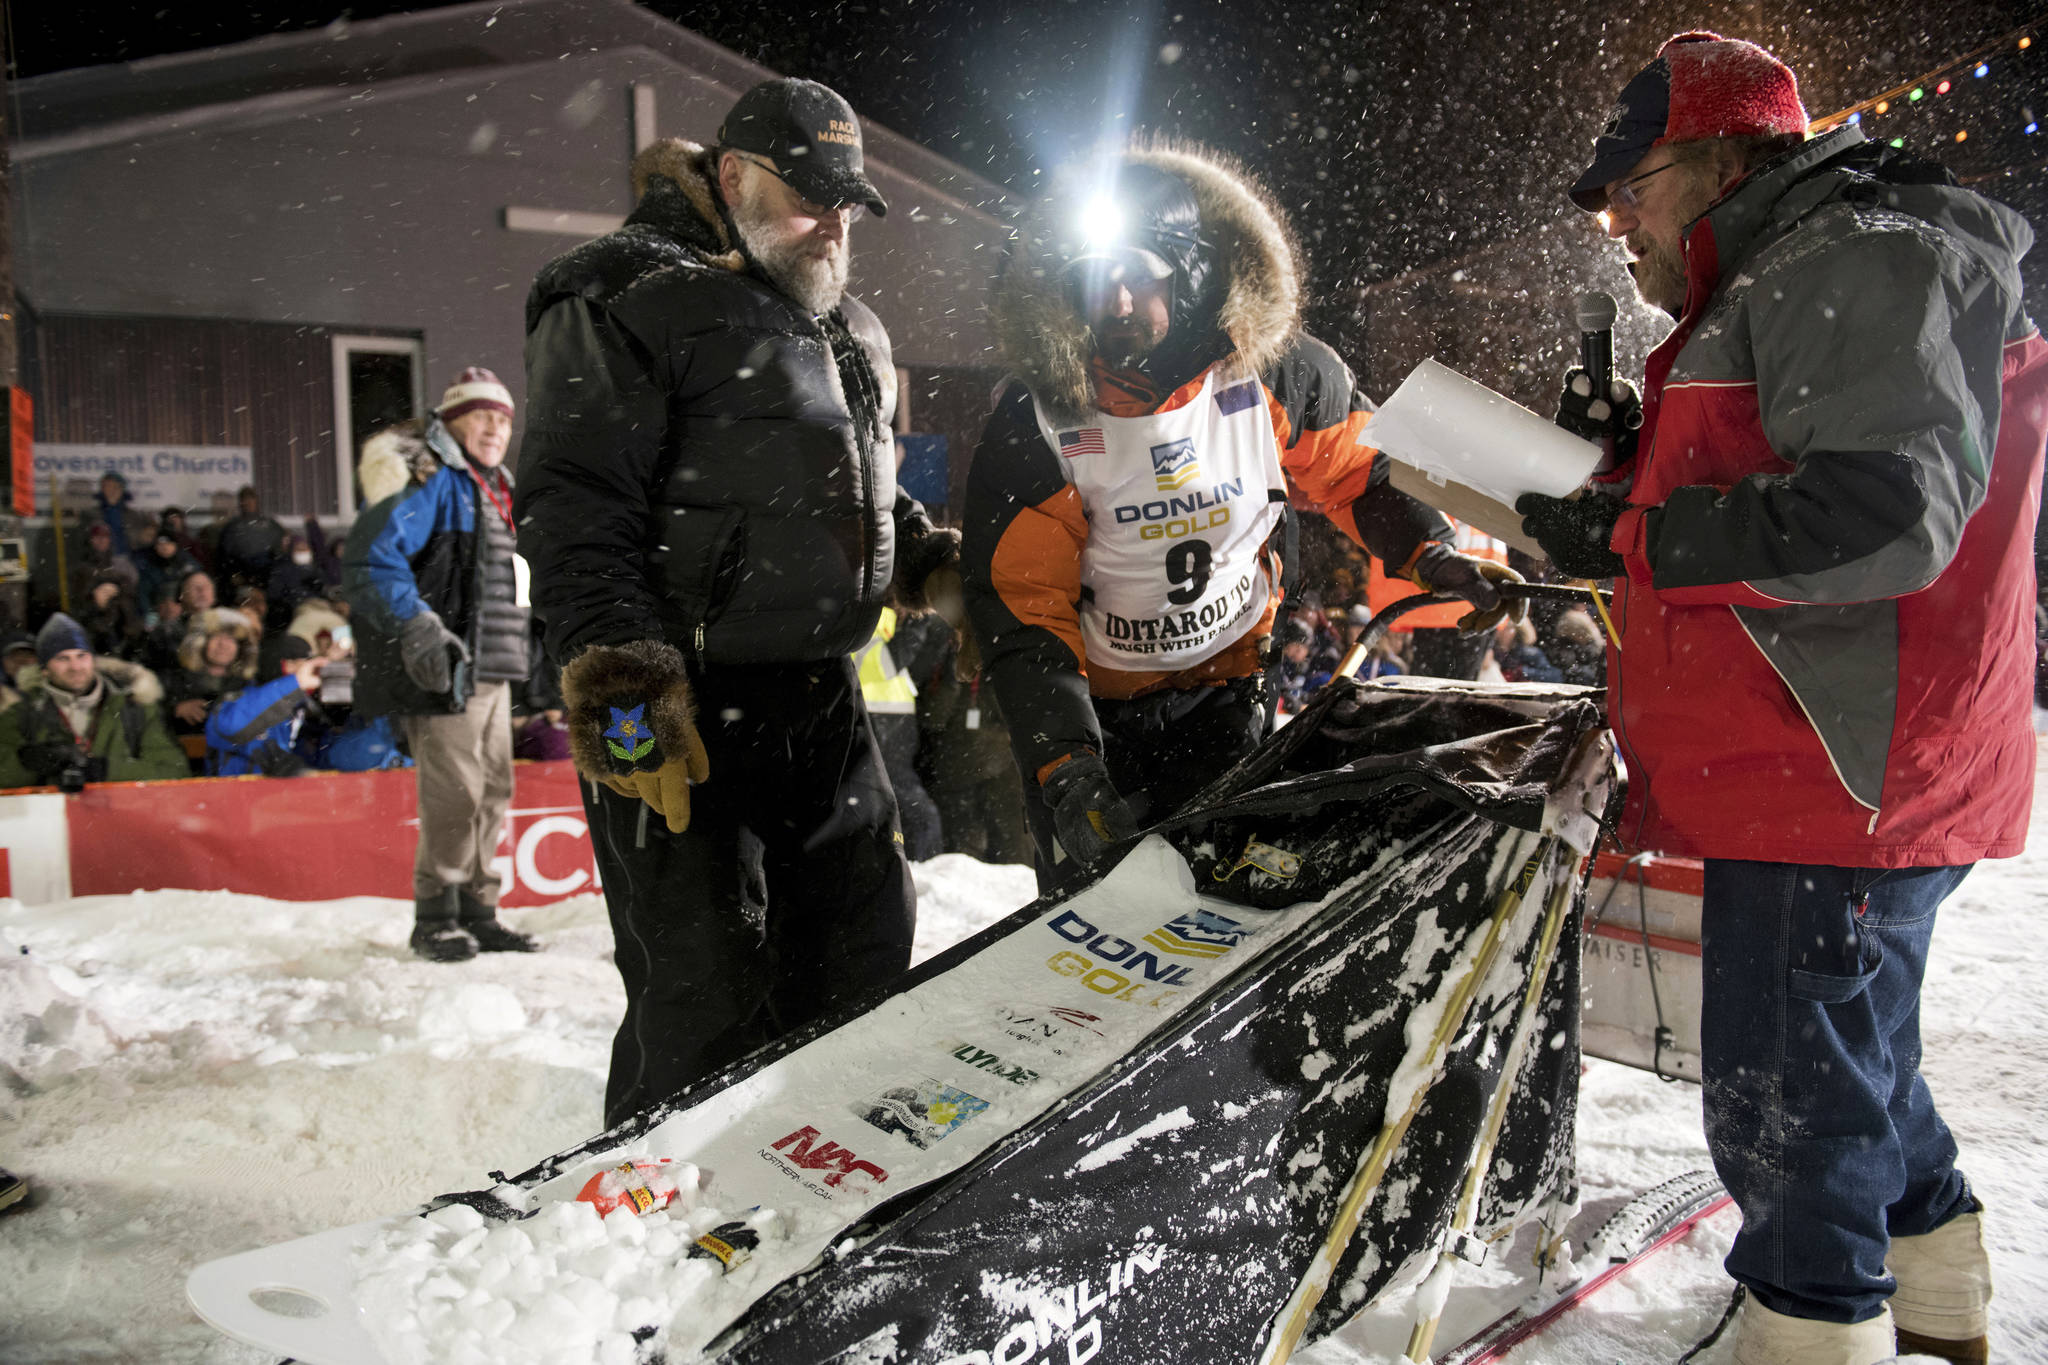 Peter Kaiser (9) checks in at the finish line, Wednesday, March 13, 2019, in Nome, Alaska, after winning the Iditarod Trail Sled Dog Race. It’s the first Iditarod victory for Kaiser in his 10th attempt. (Marc Lester/Anchorage Daily News via AP)